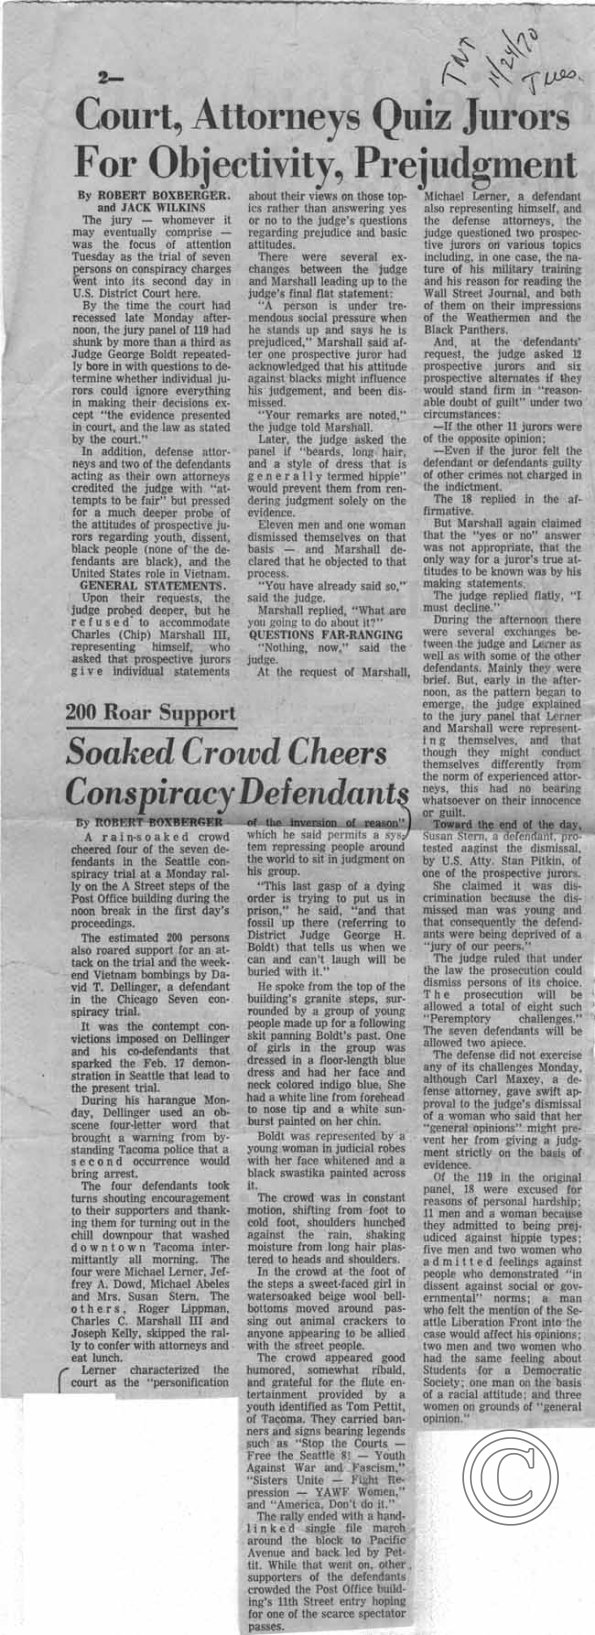 Court Attorneys Quiz Jurors For Objectivity Prejudgment, 11/24/1970